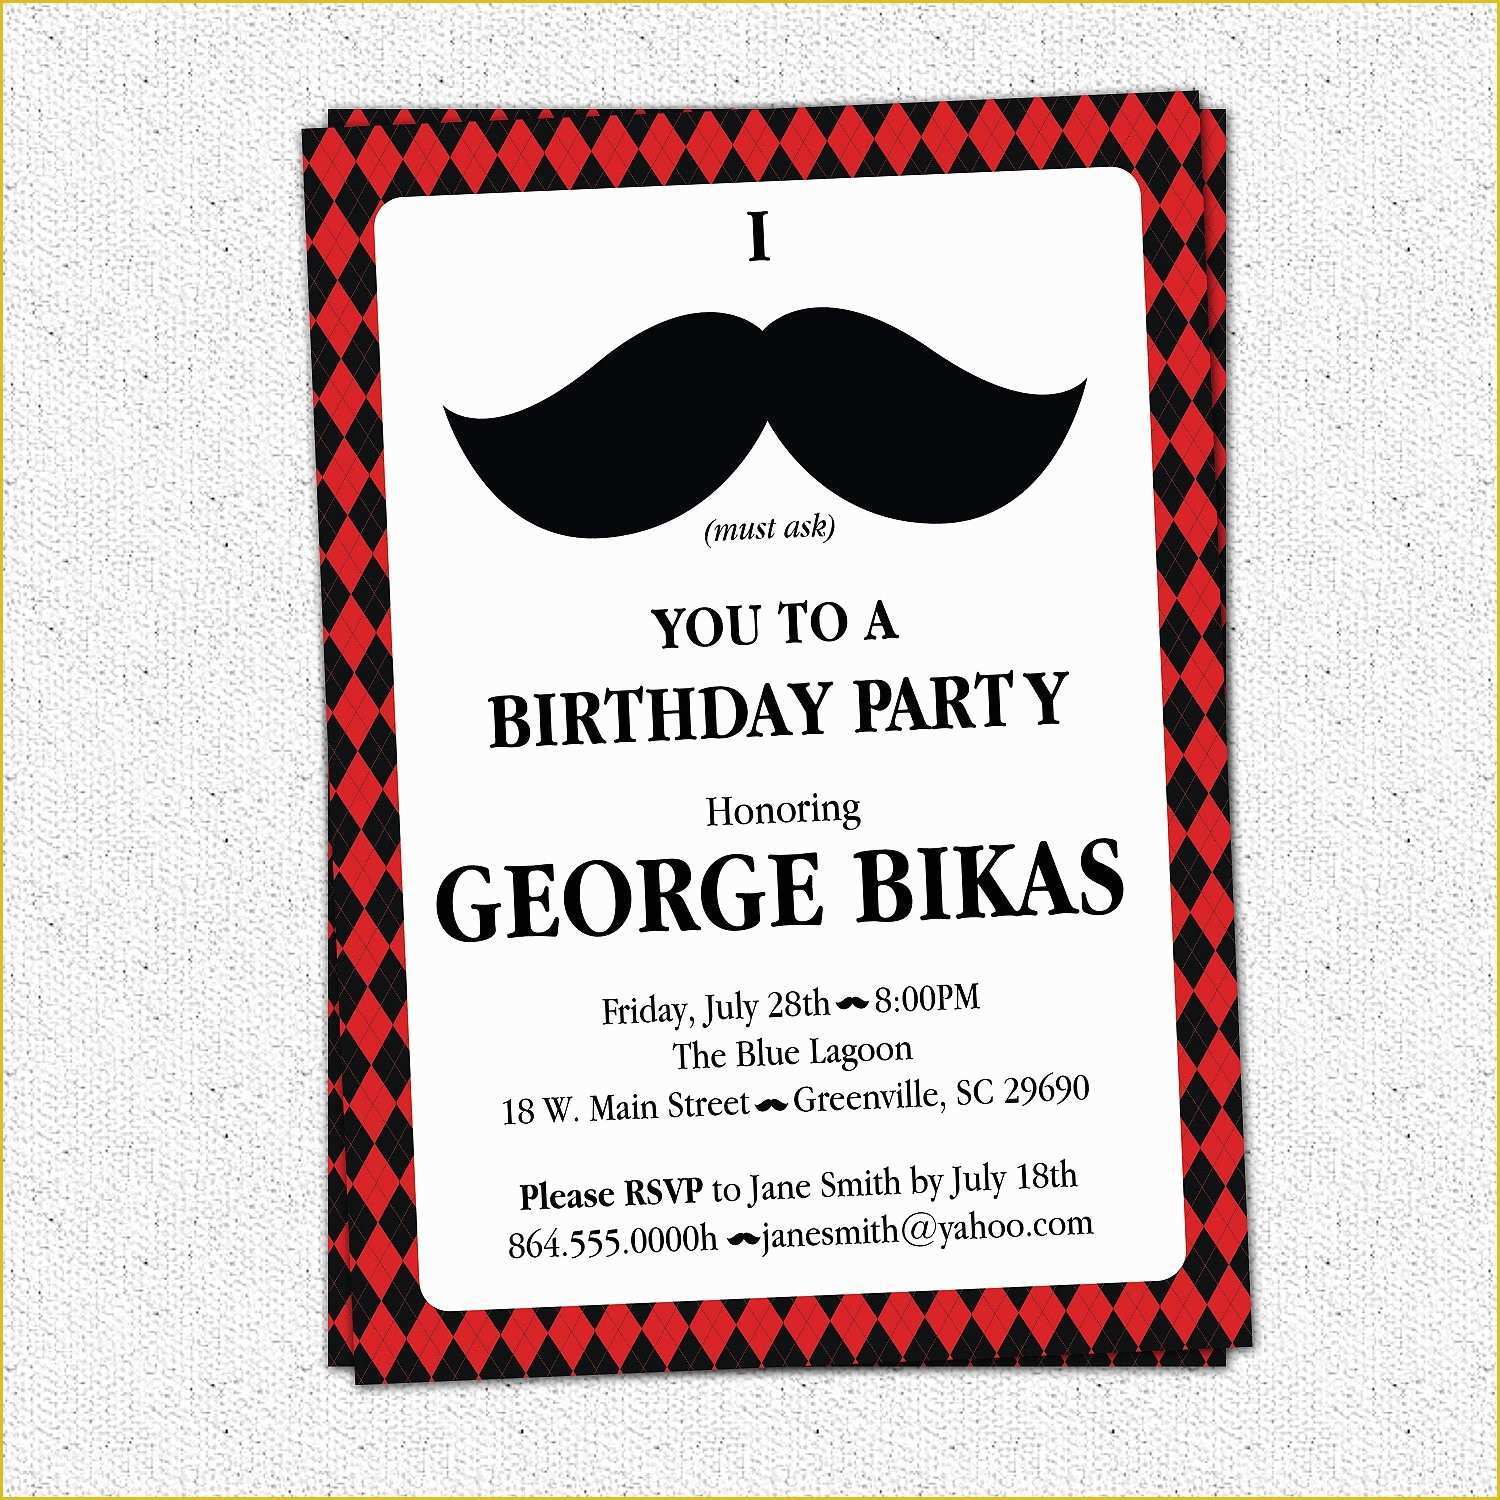 Free Birthday Invitation Templates for Adults Of Ideas Chic 60th Birthday Invitations for Any Party theme